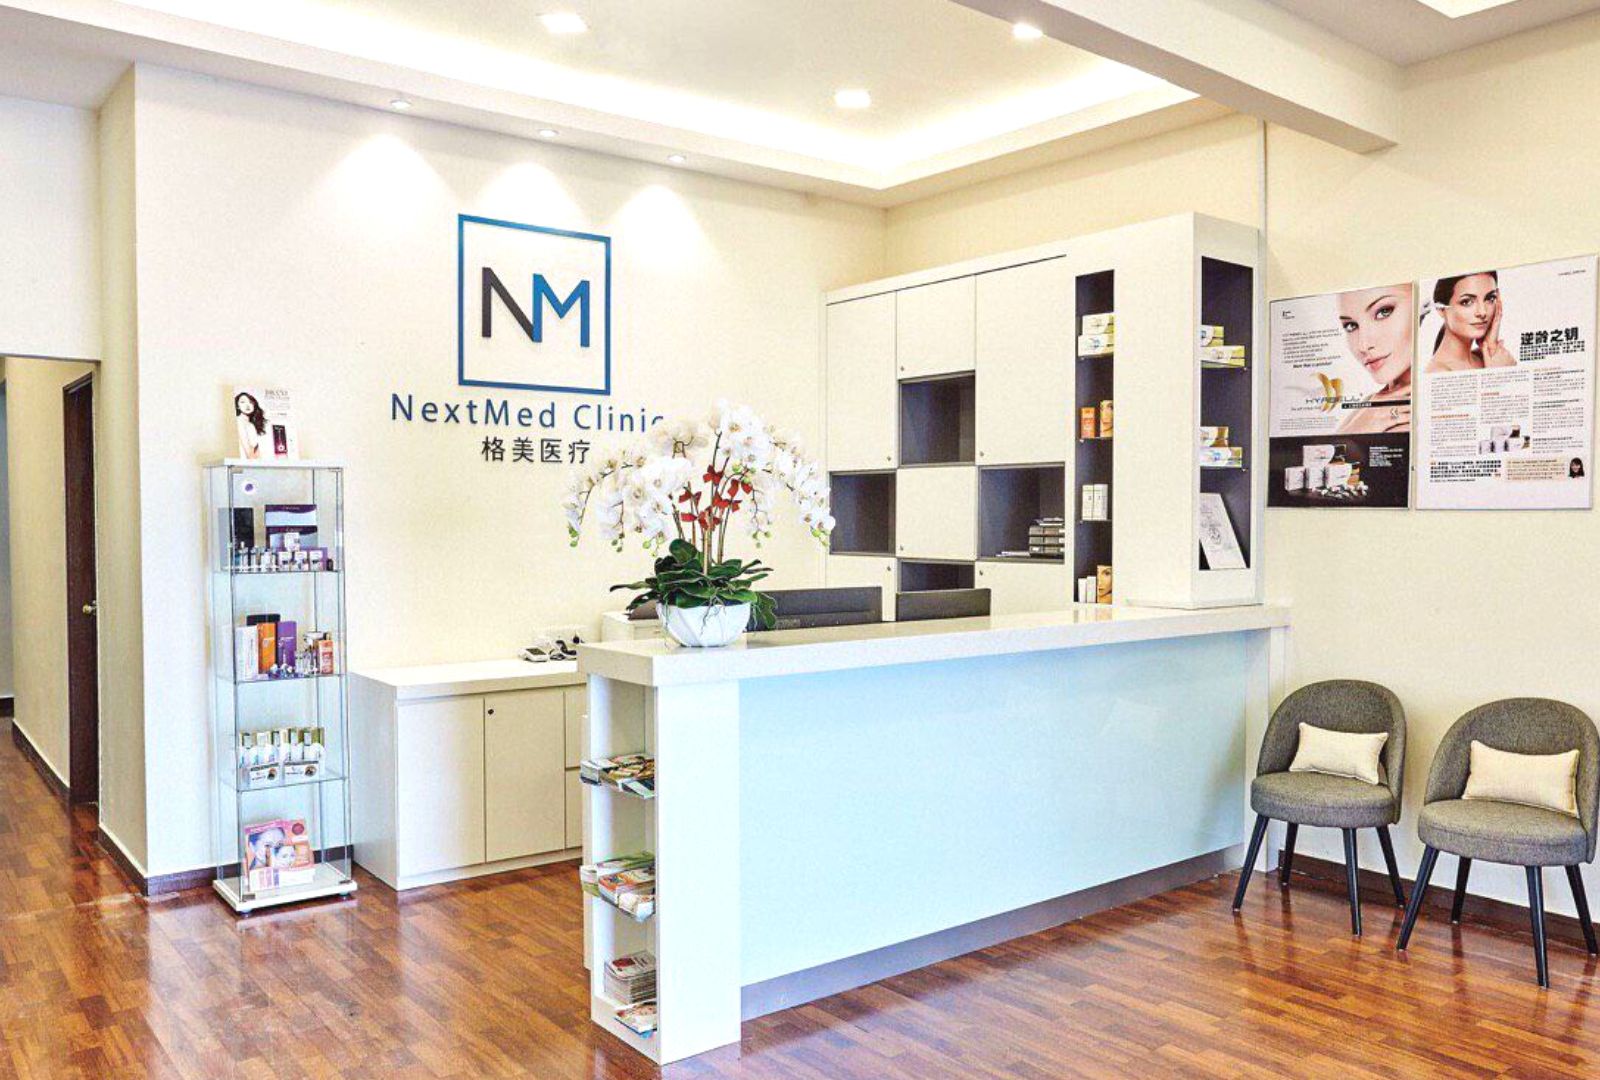 NextMed rates as the best skin care clinic and award winning aesthetic clinic malaysia